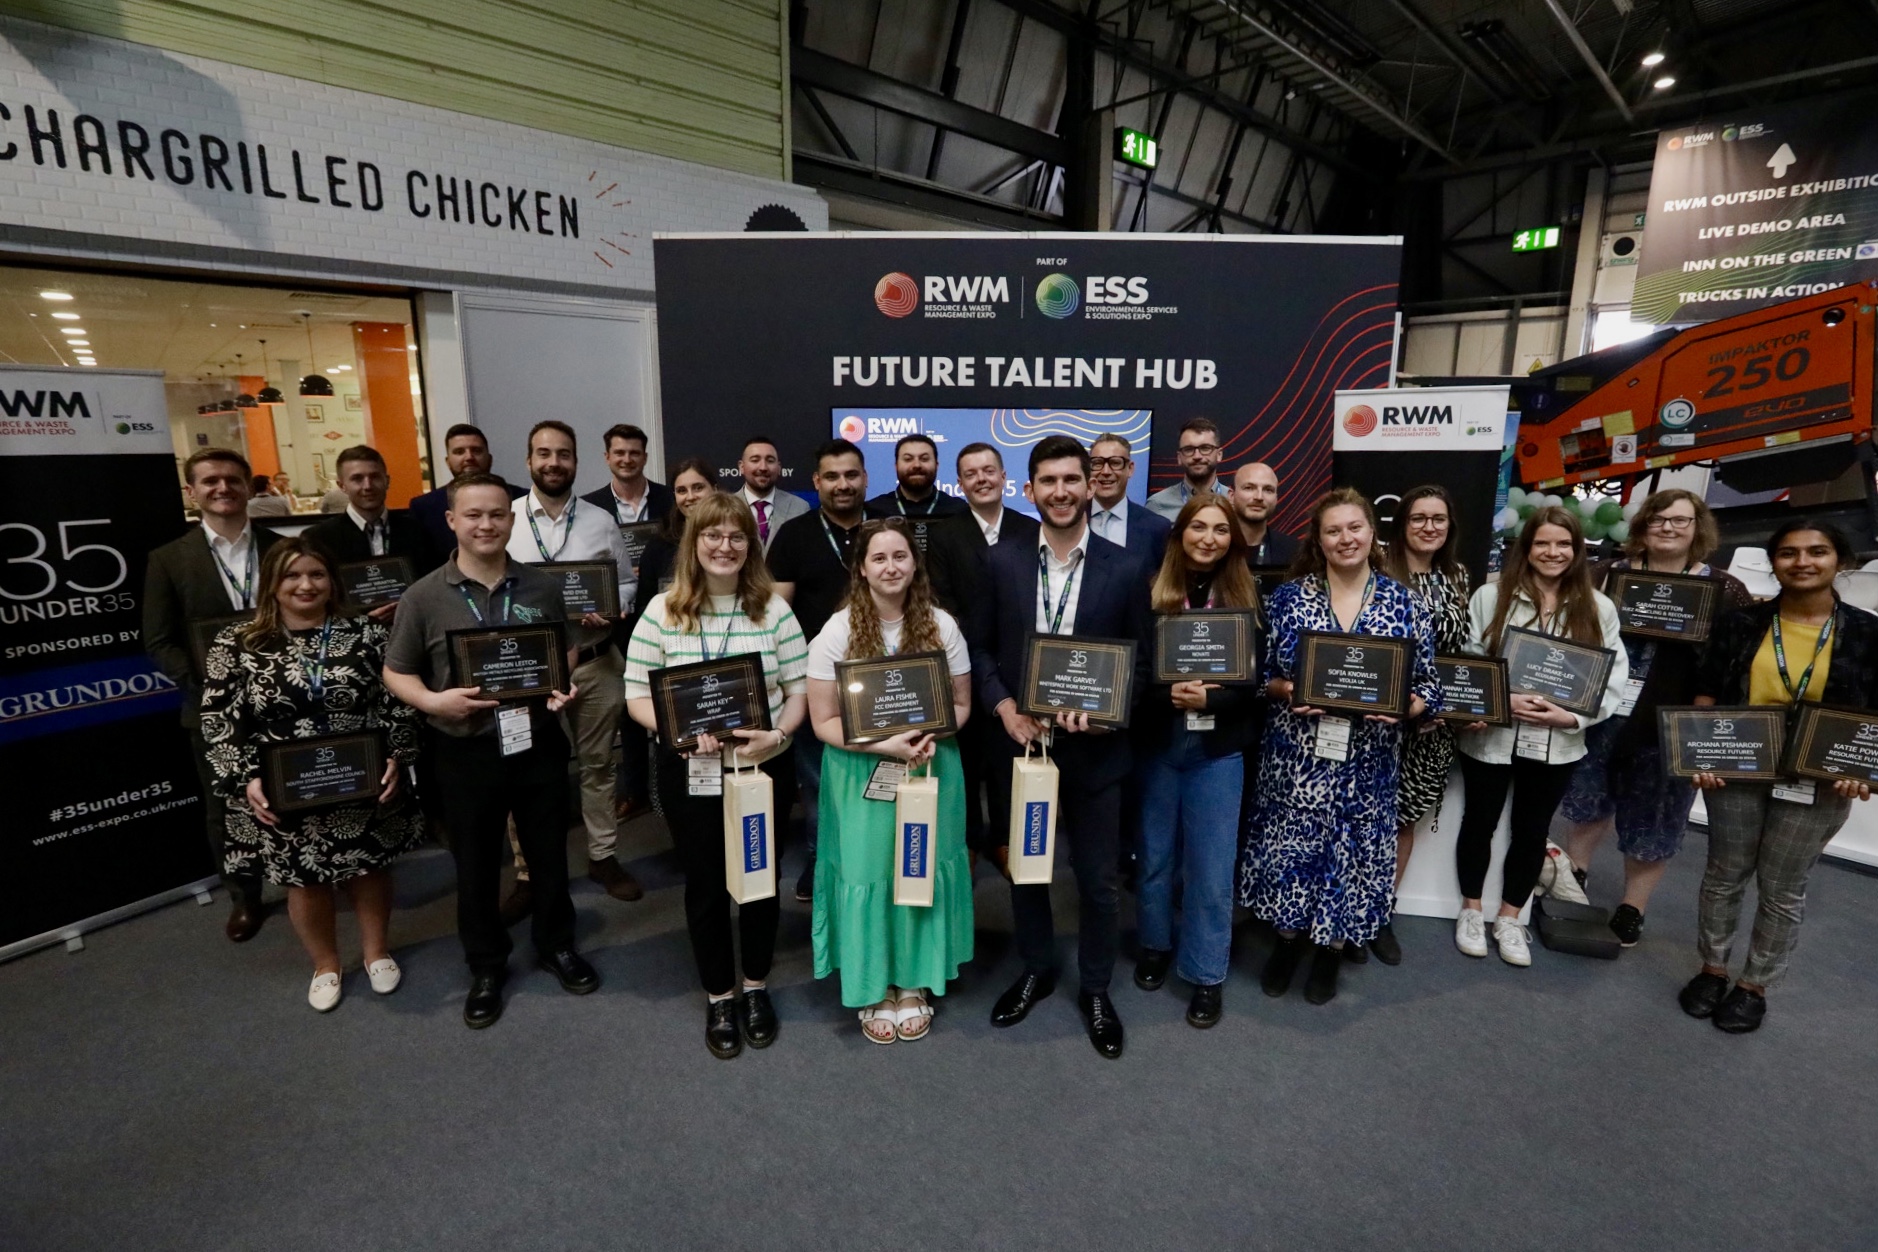 The 35 Under 35 winners for 2023 were announced at the RWM show